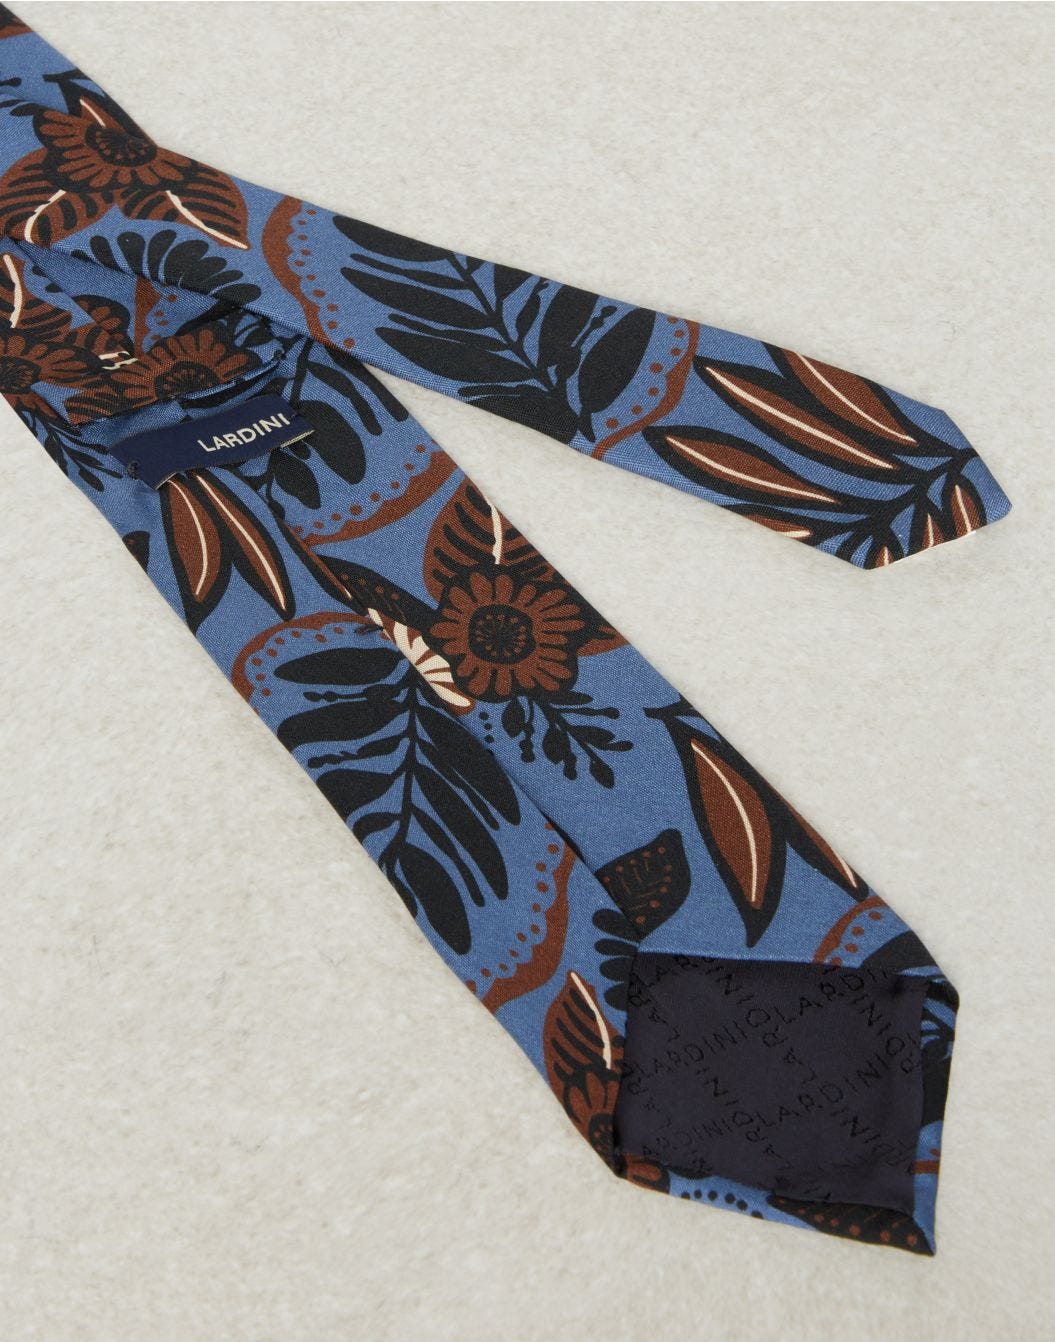 Wool-and-silk tie with geometric patterning